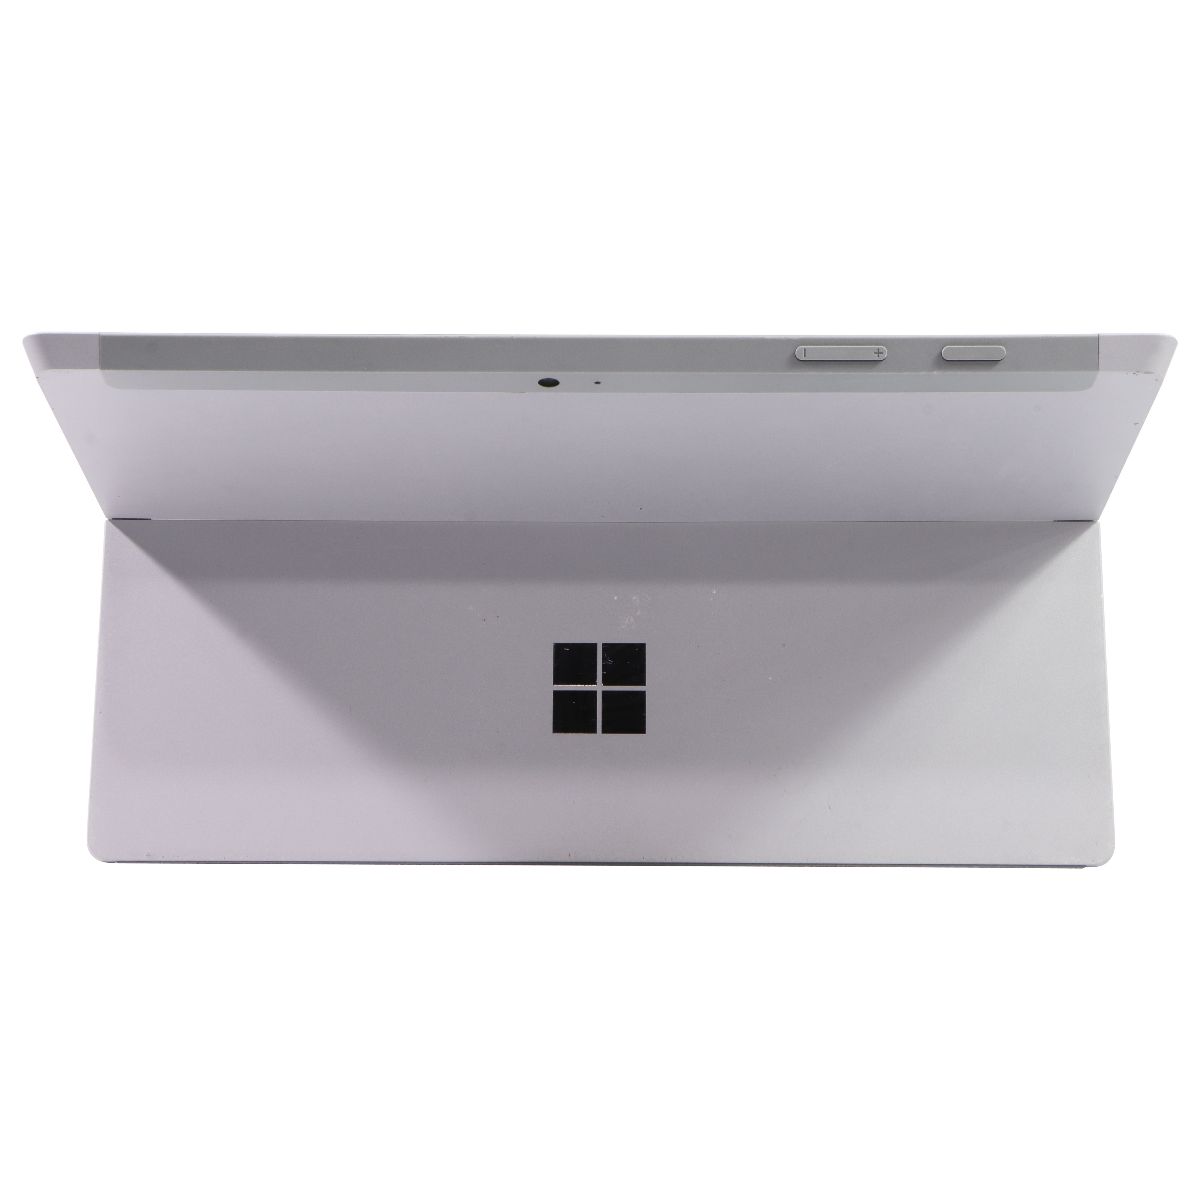 Microsoft Surface 3 (10.8-in) Wi-Fi Tablet x7-Z8700/64GB SSD/2GB/10 Home (1645) iPads, Tablets & eBook Readers Microsoft    - Simple Cell Bulk Wholesale Pricing - USA Seller